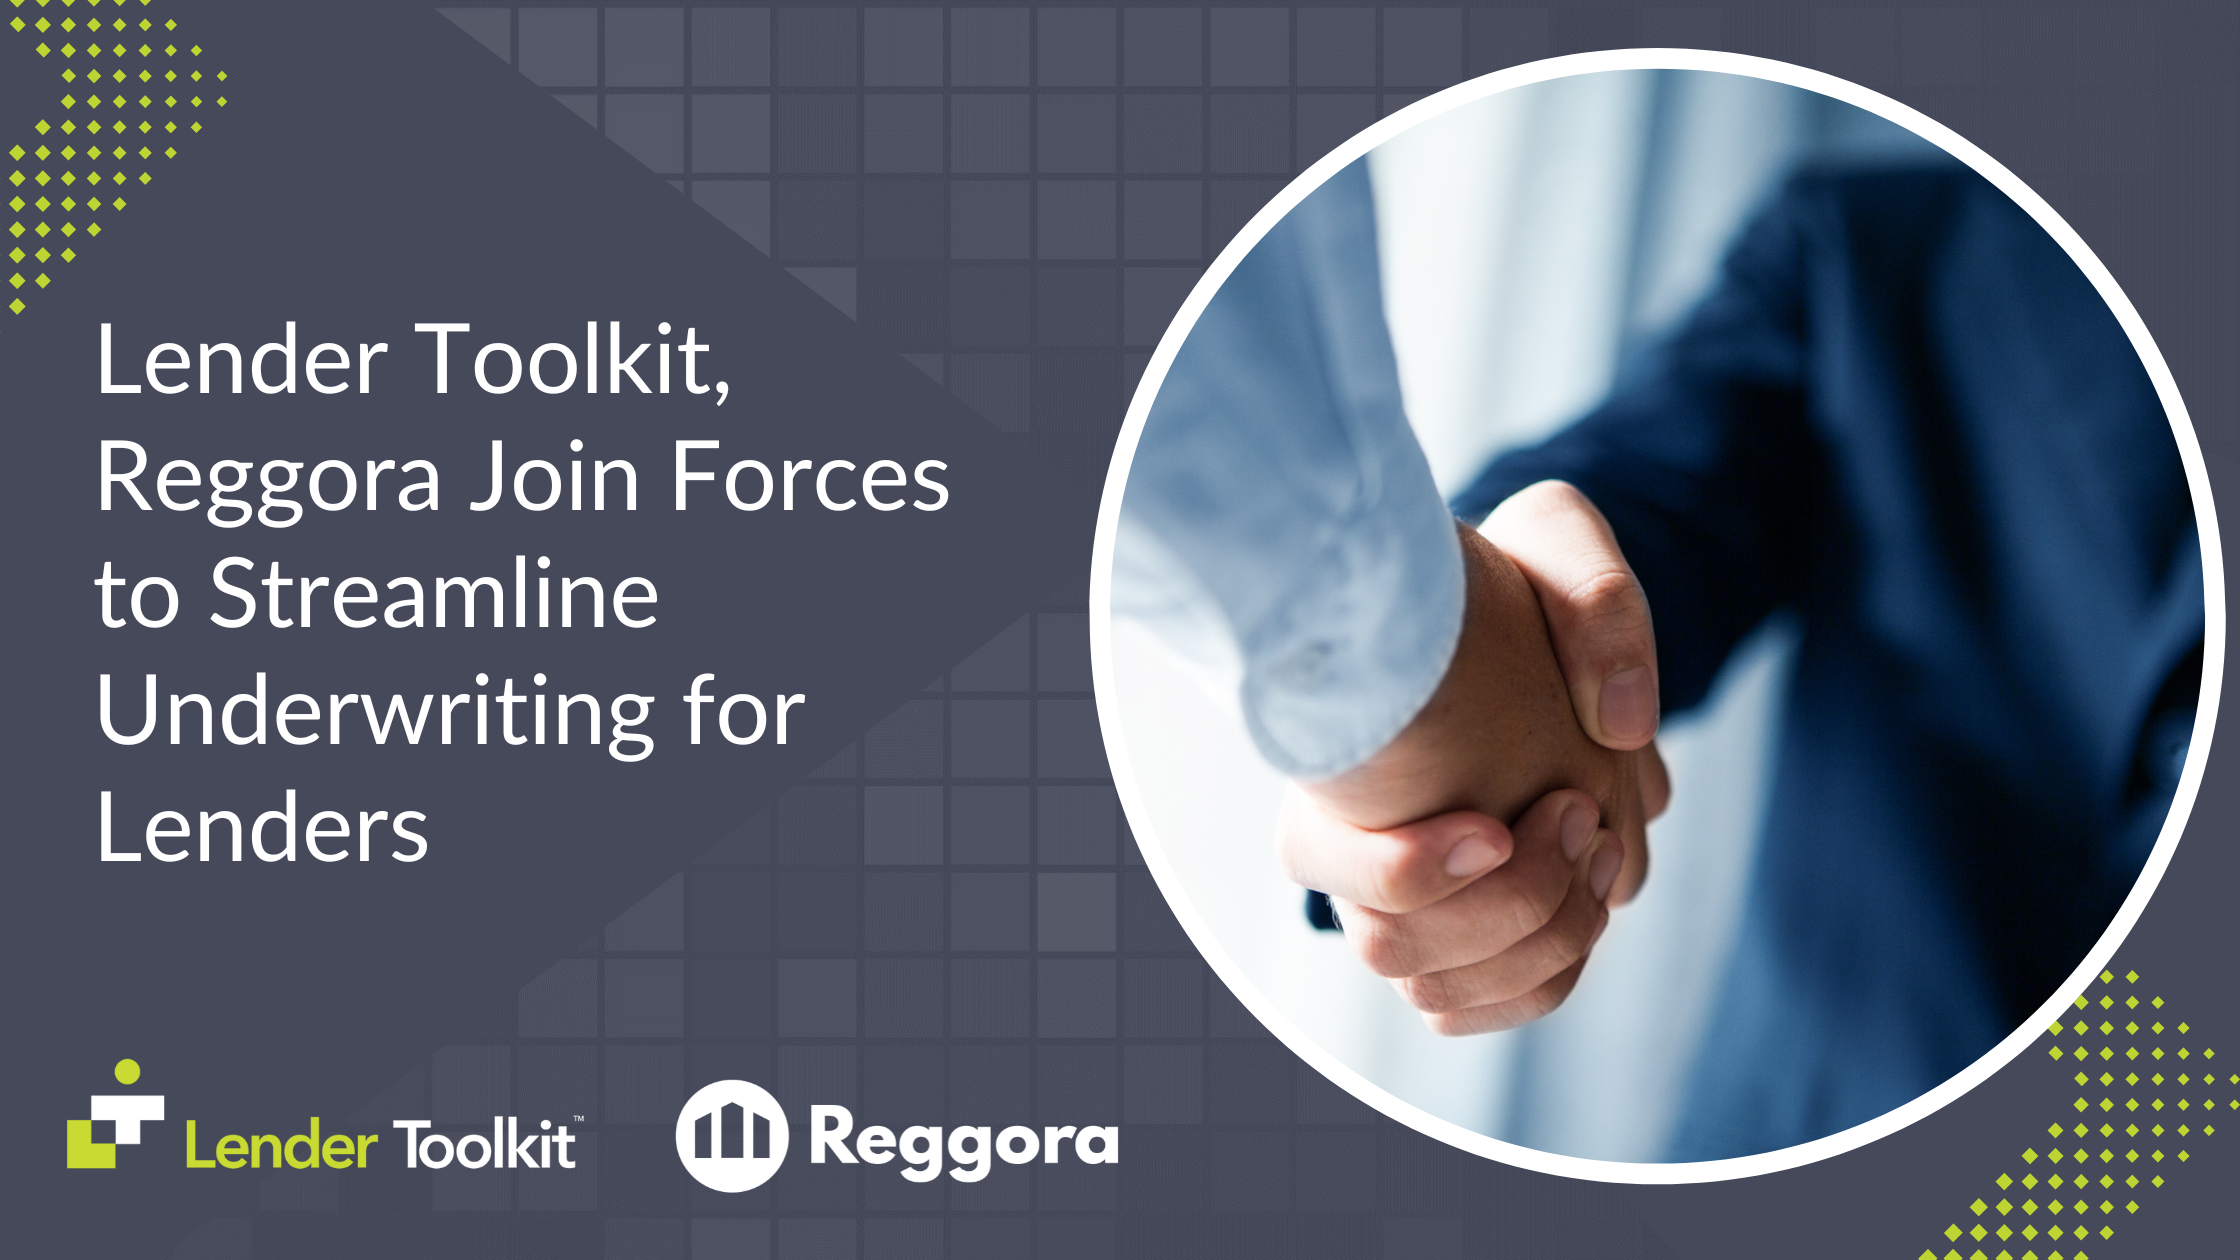 Lender Toolkit, Reggora Join Forces to Streamline Automated Underwriting for Lenders